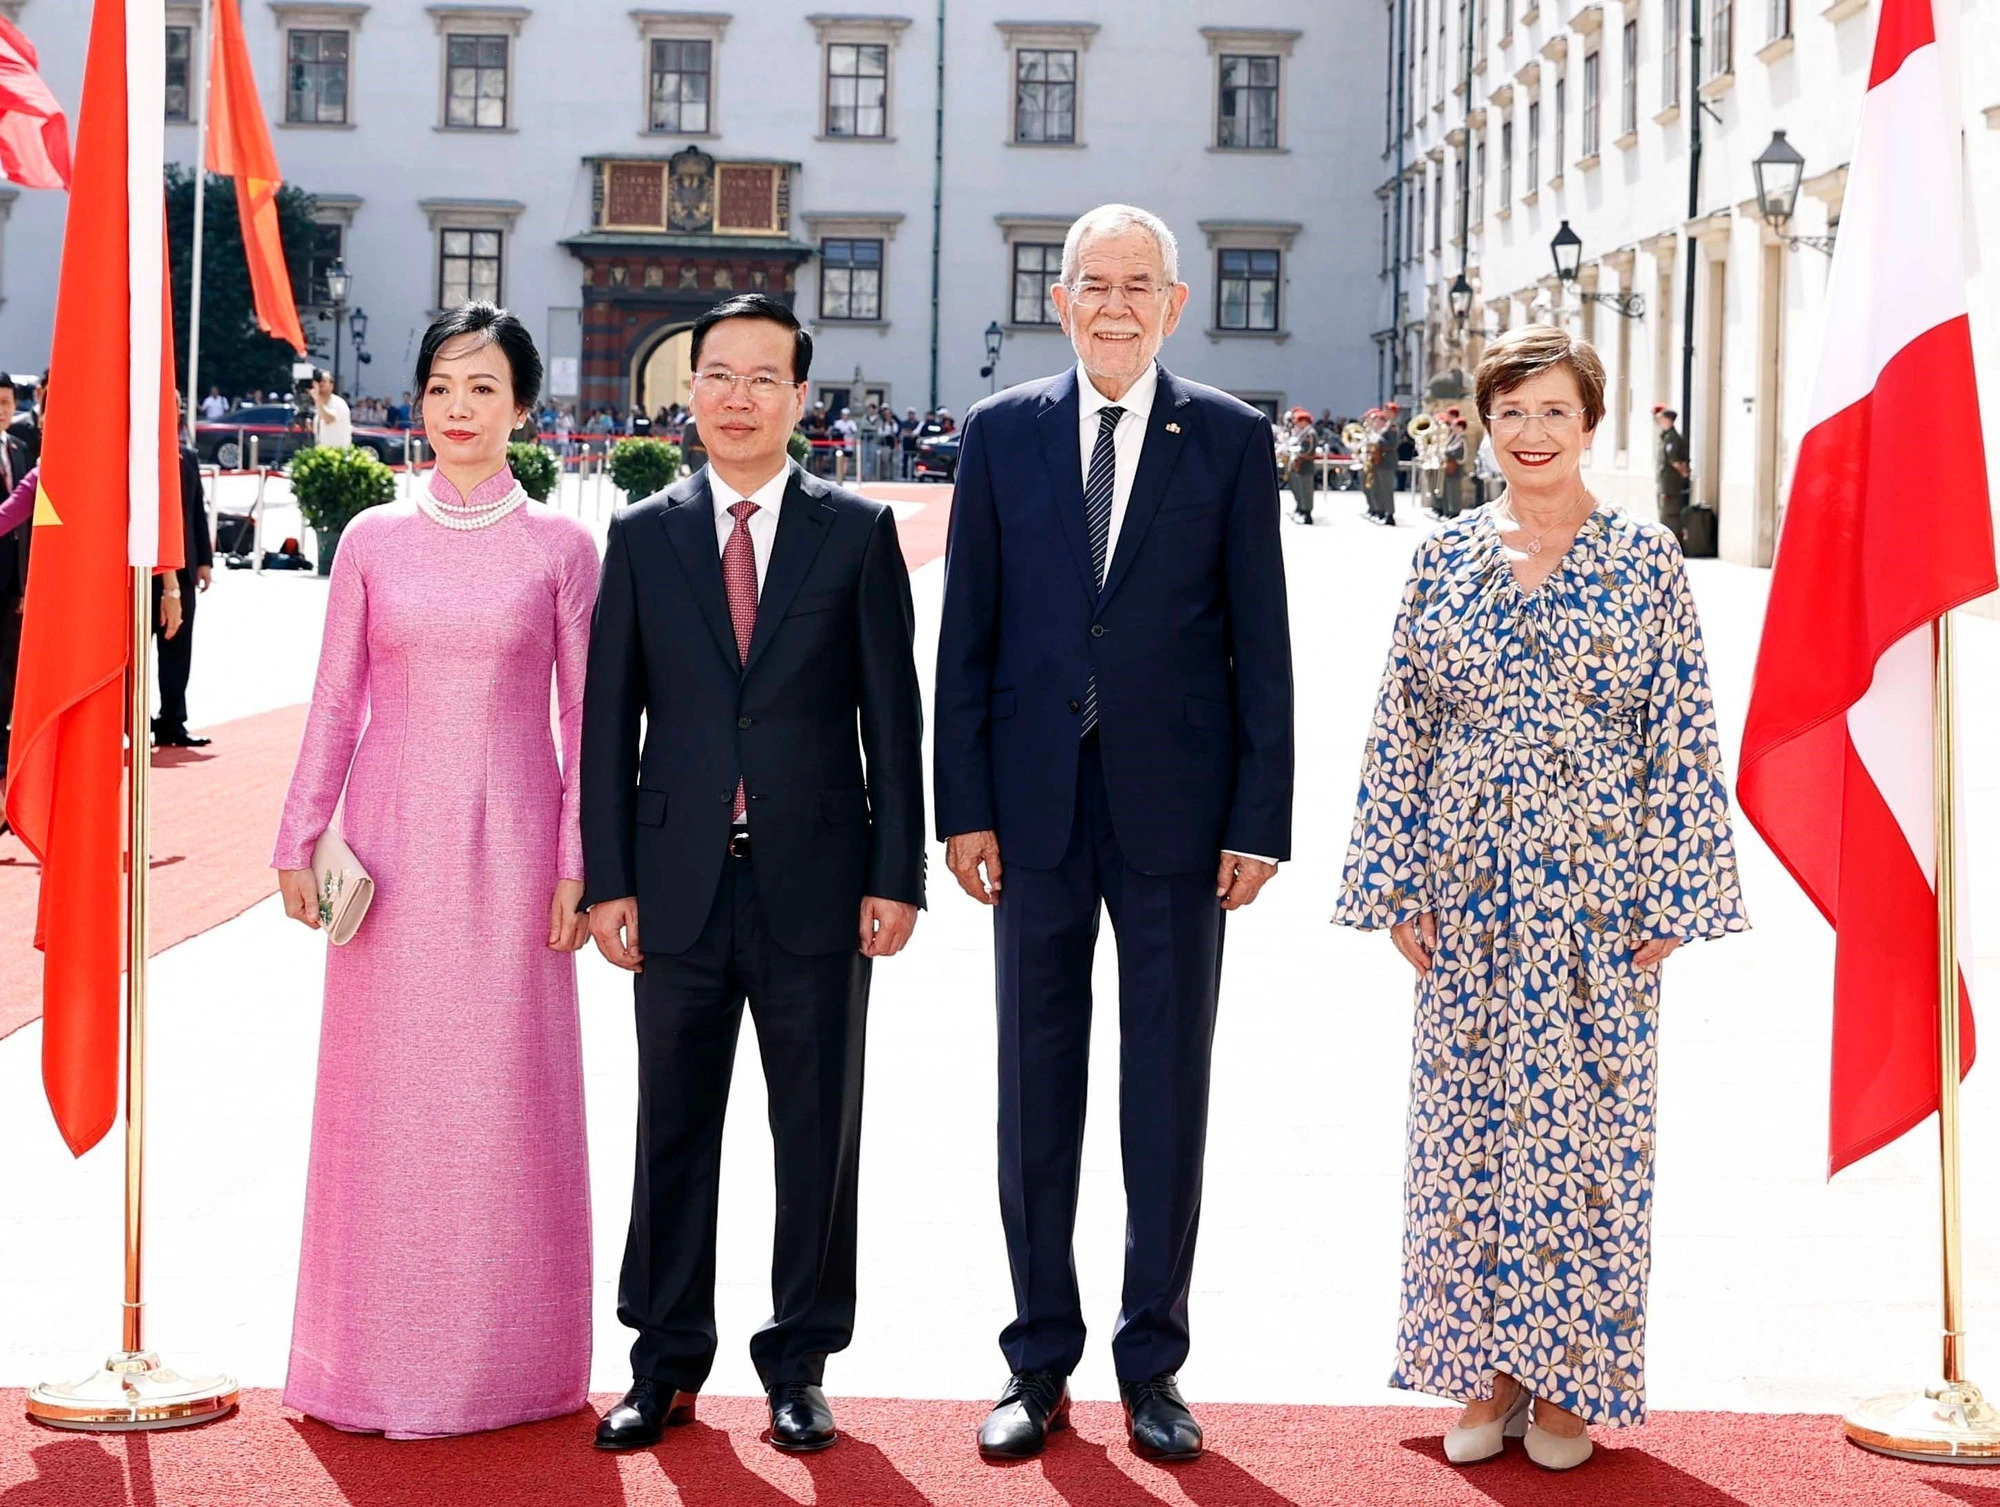 Vietnamese State President Vo Van Thuong’s Austria visit takes place after the two nations celebrated the 50th anniversary of their diplomatic ties in 2022. In this photo, President Thuong (L, 2nd), his Austrian counterpart Alexander Van der Bellen, and their spouses pose for a group photo at a welcome ceremony for the top Vietnamese official at the Hofburg Palace in Vienna, July 24, 2023. Photo: Vietnam News Agency